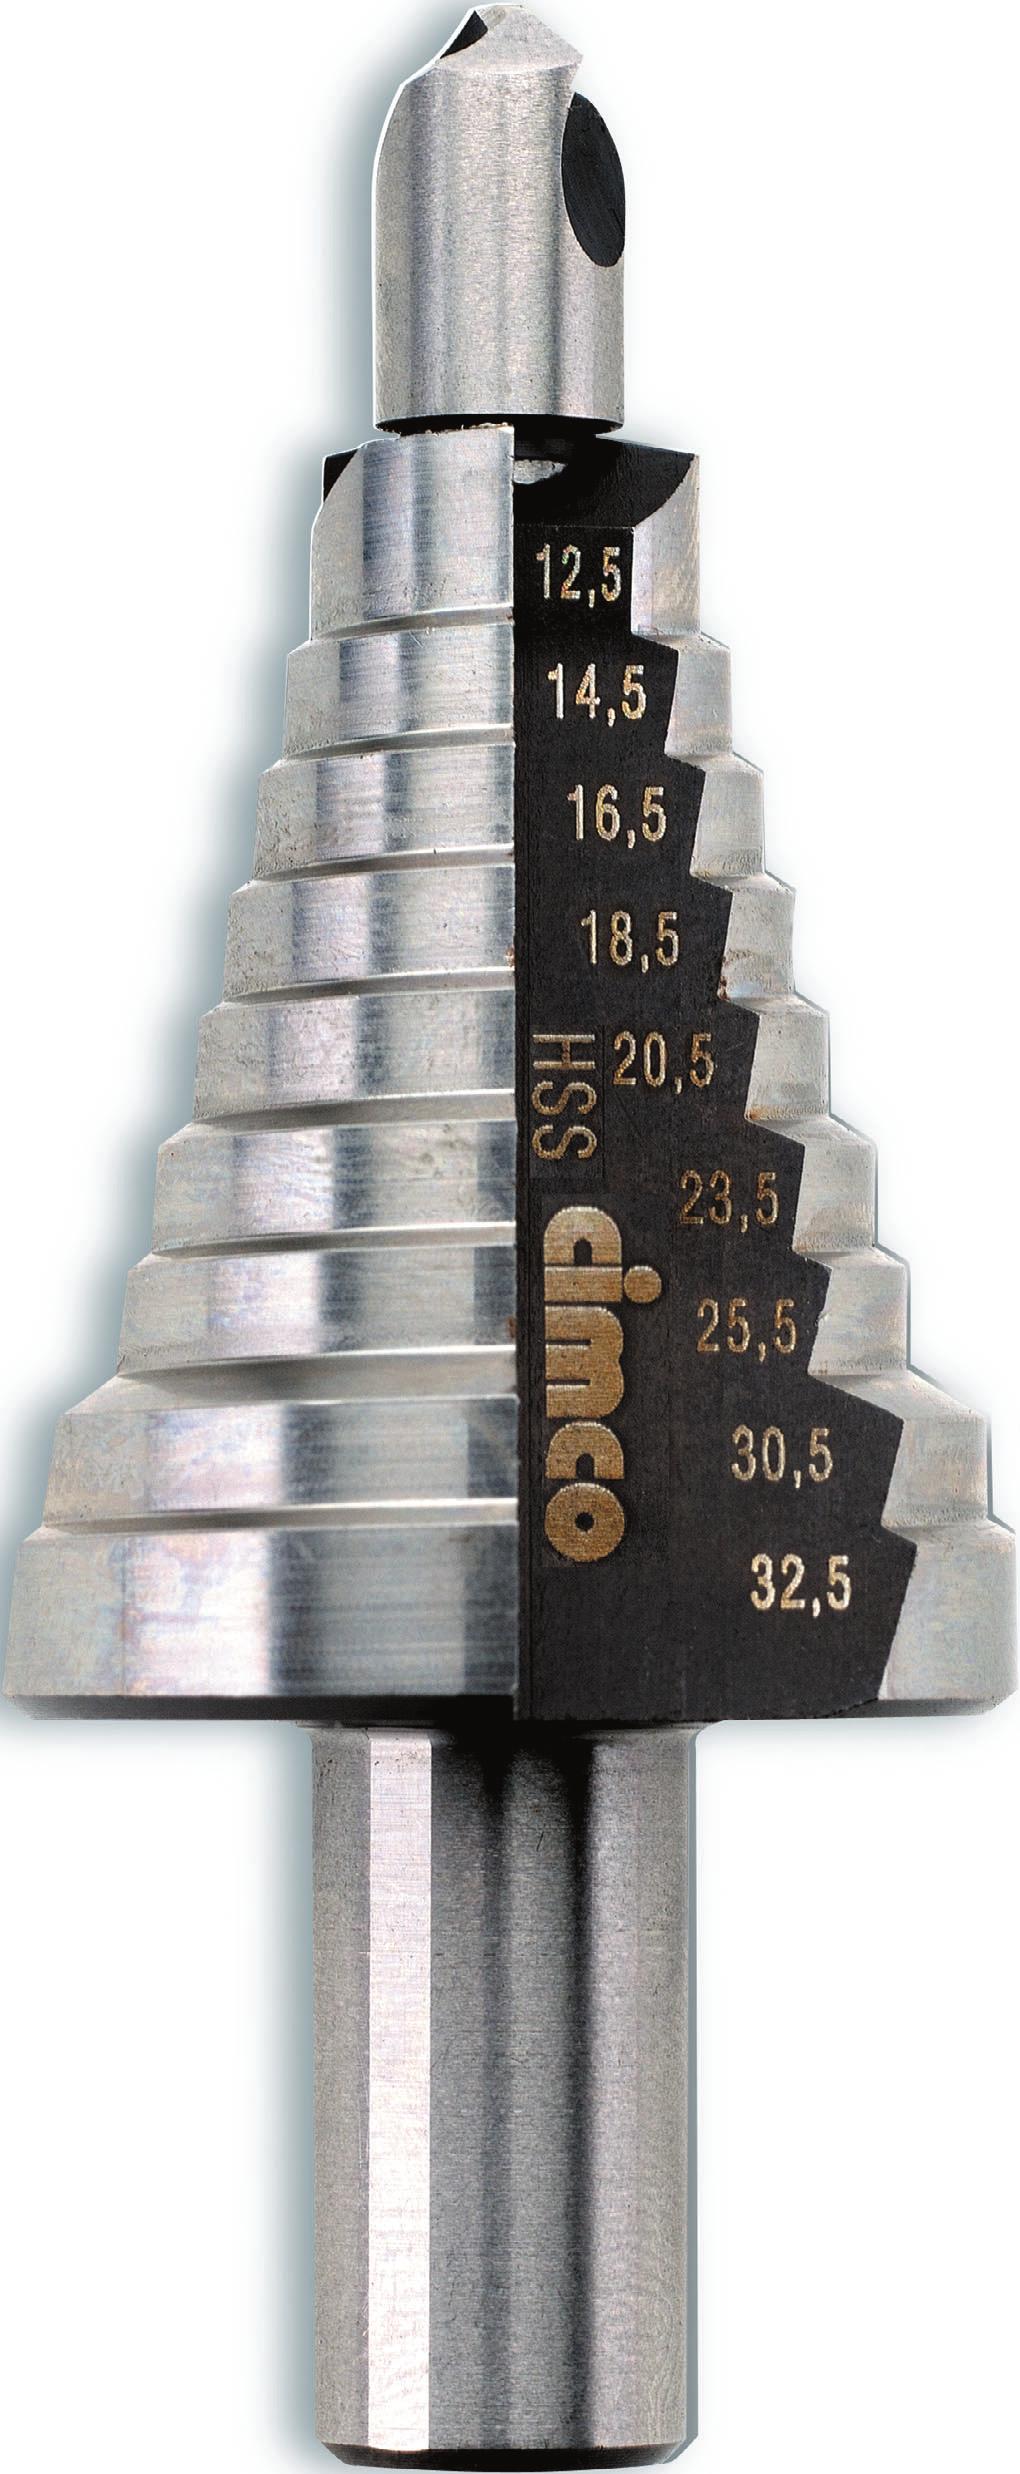 Once the centring drill become worn, it is only these drill that are replaced within in a matter of seconds and not the entire drill bit which saves a lot of money.